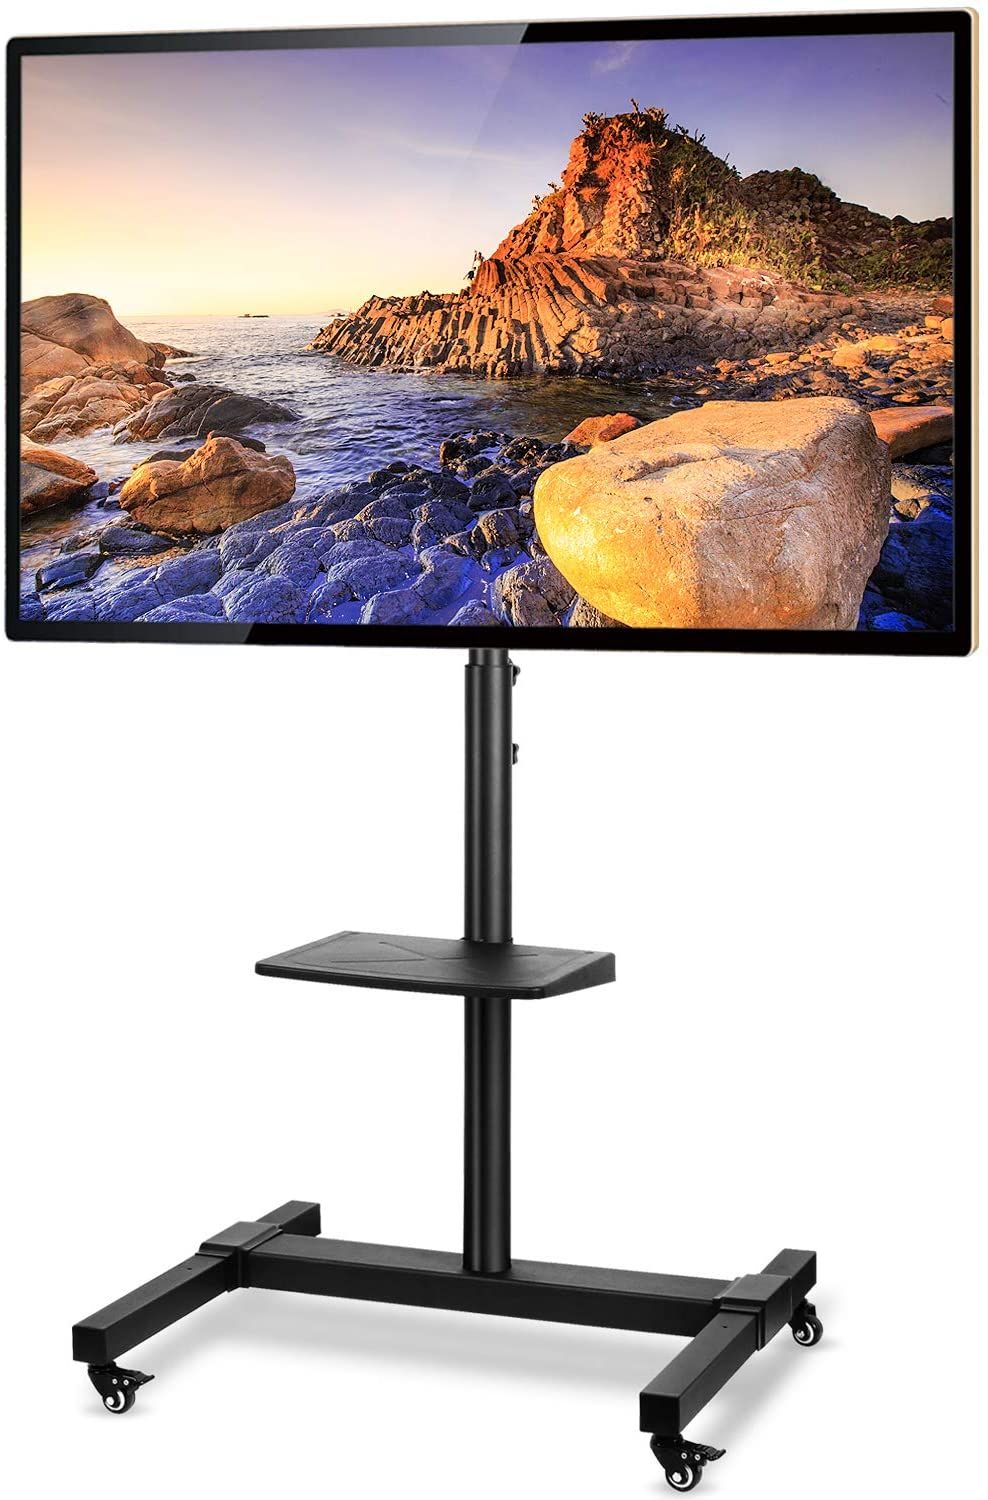 10 Best Rolling Tv Stands In 2020 | Unbiased Review In Rolling Tv Stands With Wheels With Adjustable Metal Shelf (View 13 of 15)